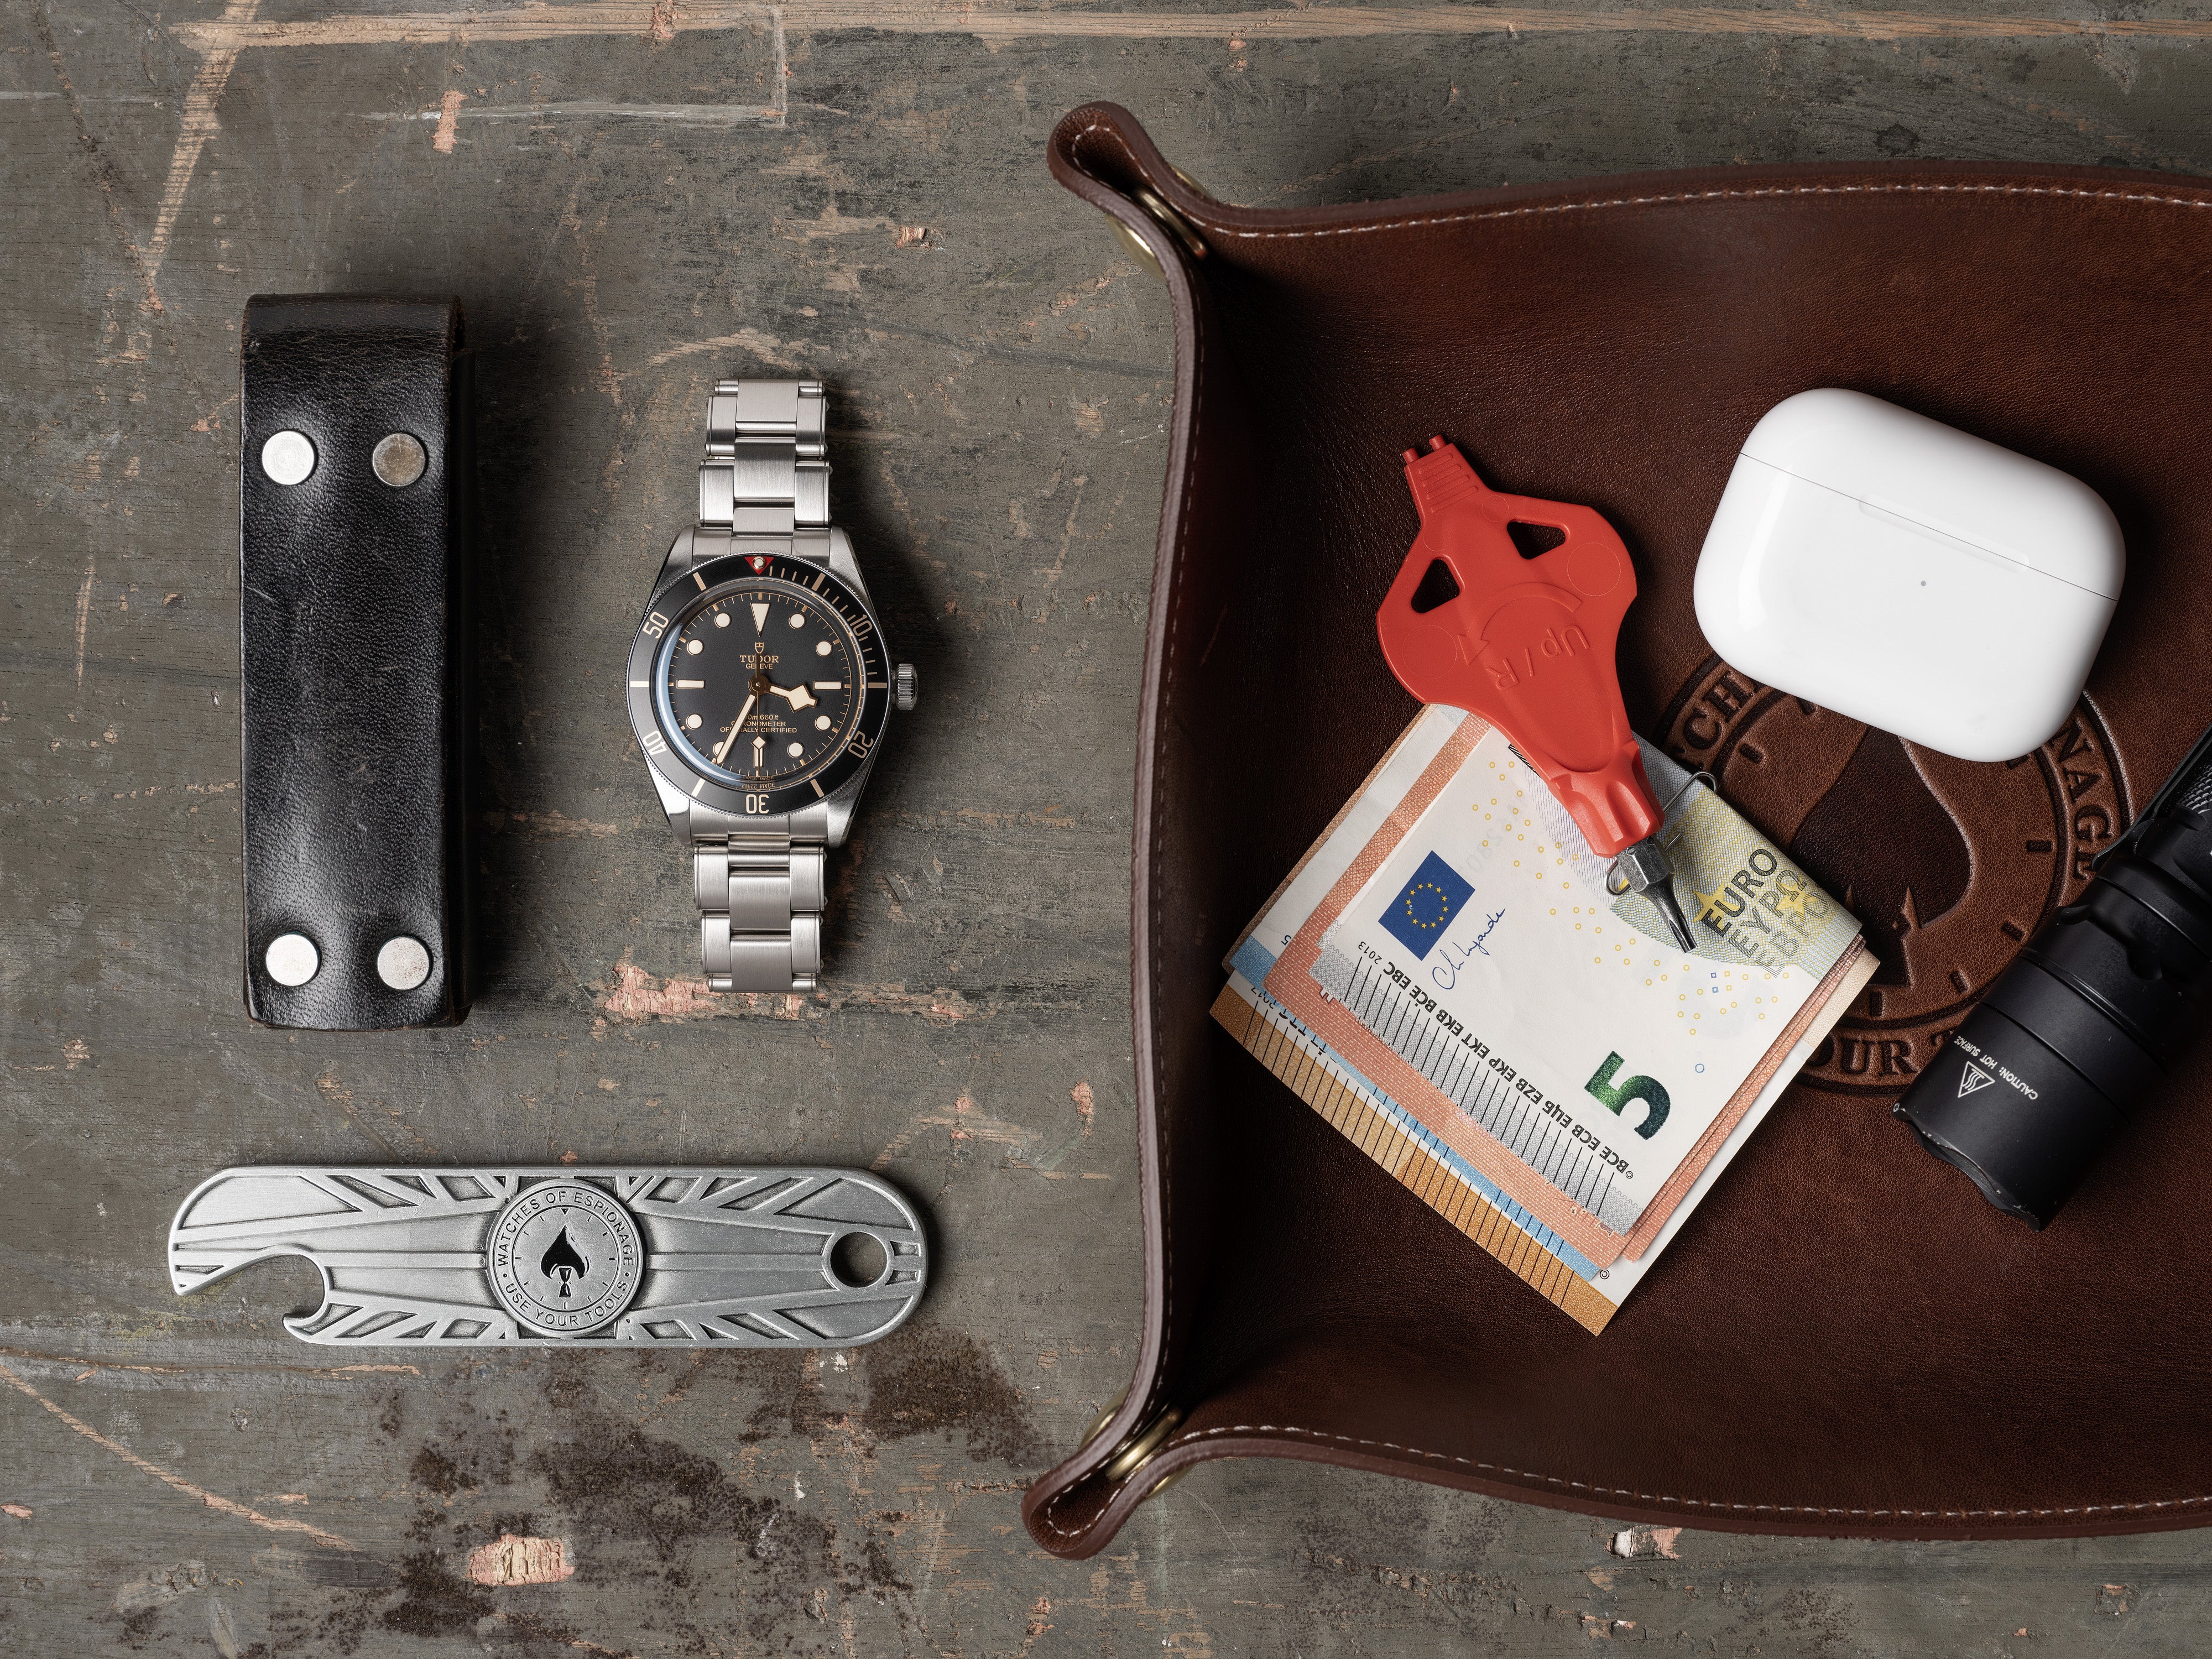 Hodinkee's Luxury Watch Collector's Case Is Built For Traveling - Maxim